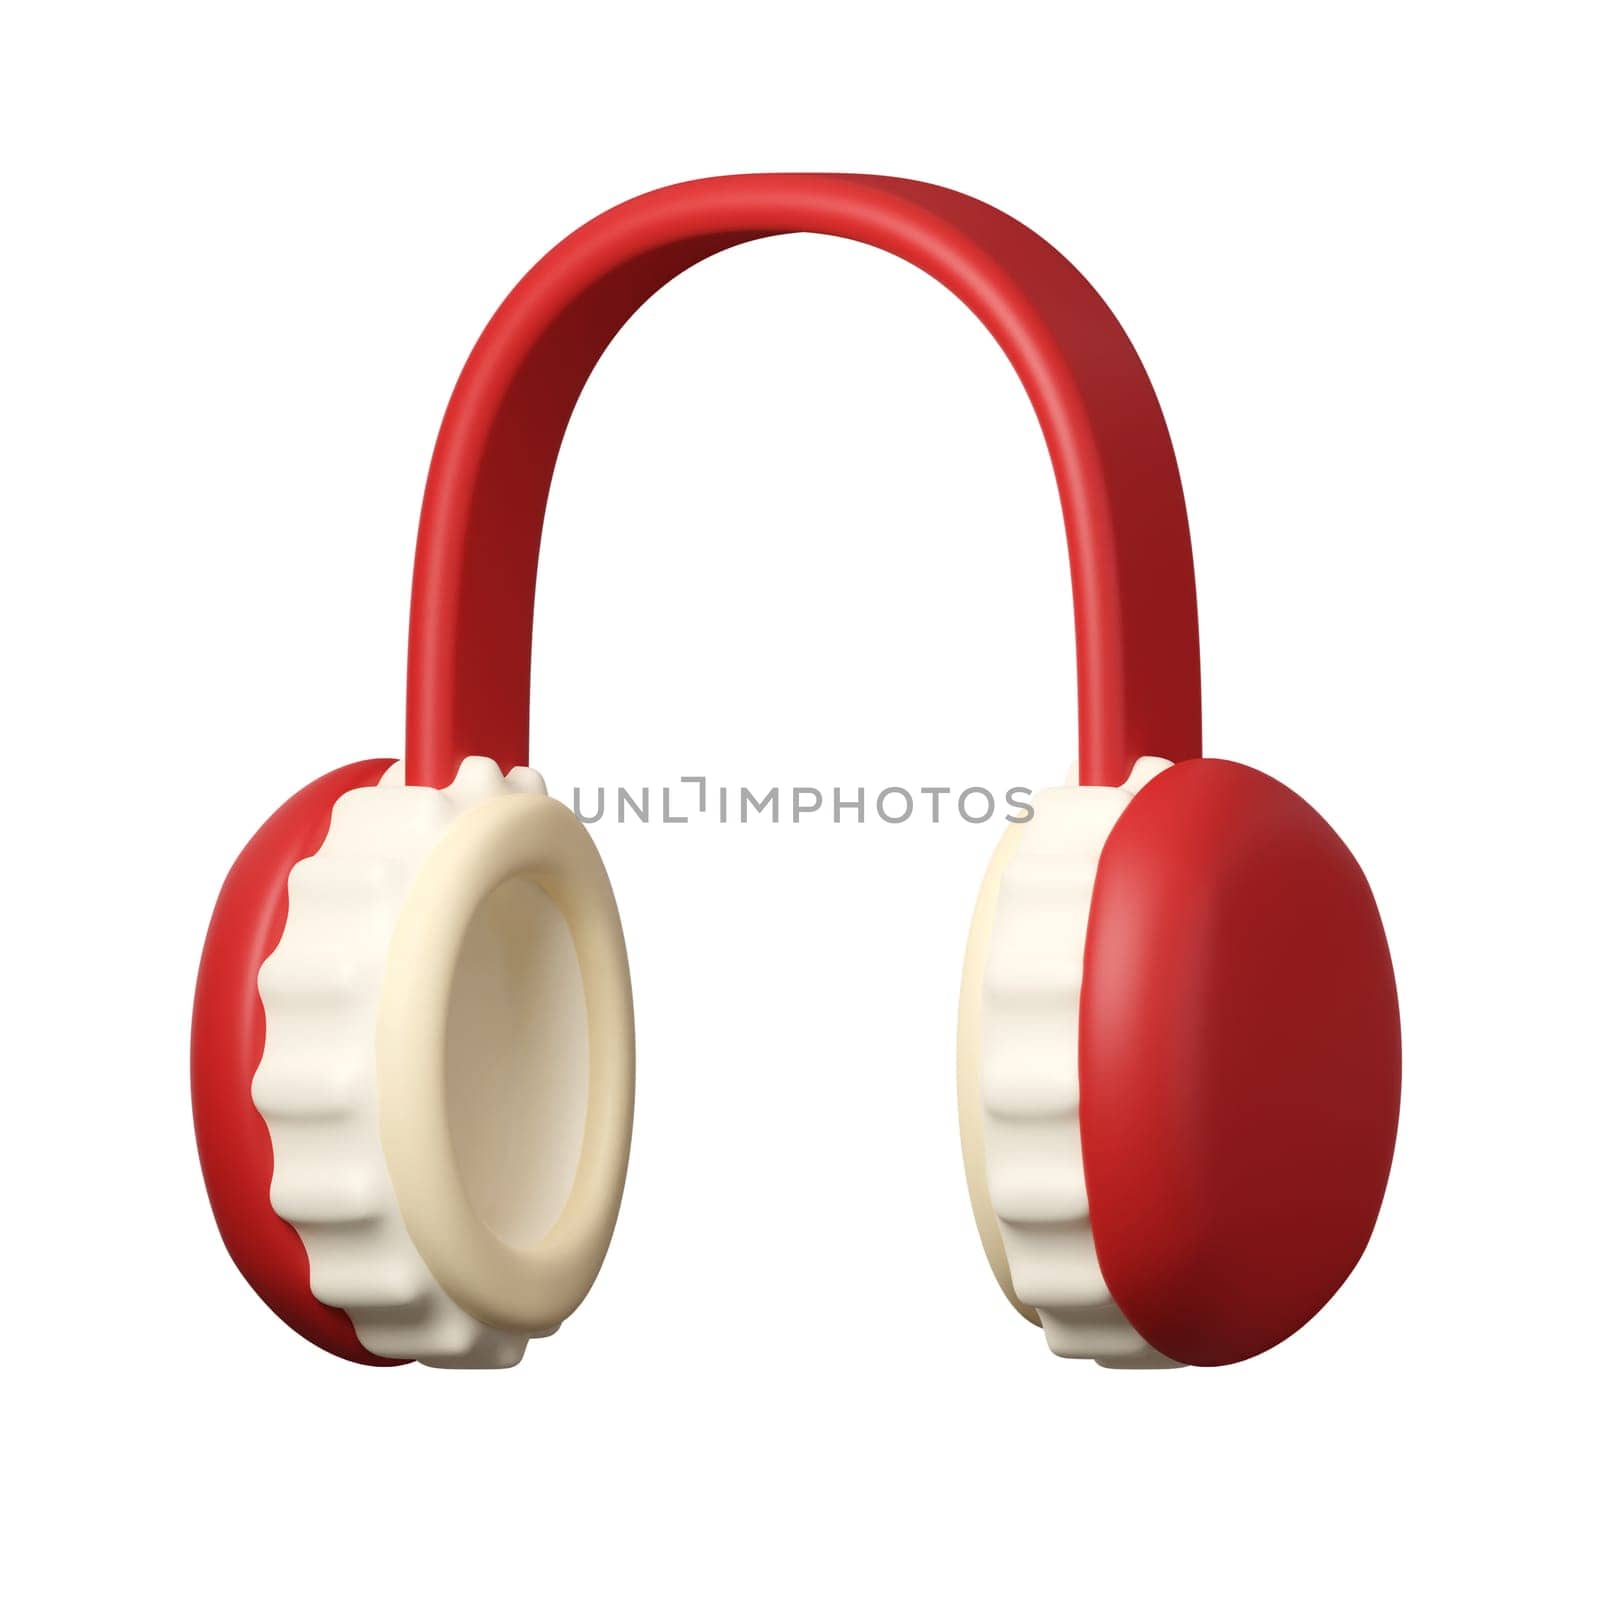 3d Christmas warm headphones icon. minimal decorative festive conical shape tree. New Year's holiday decor. 3d design element In cartoon style. Icon isolated on white background. 3d illustration.